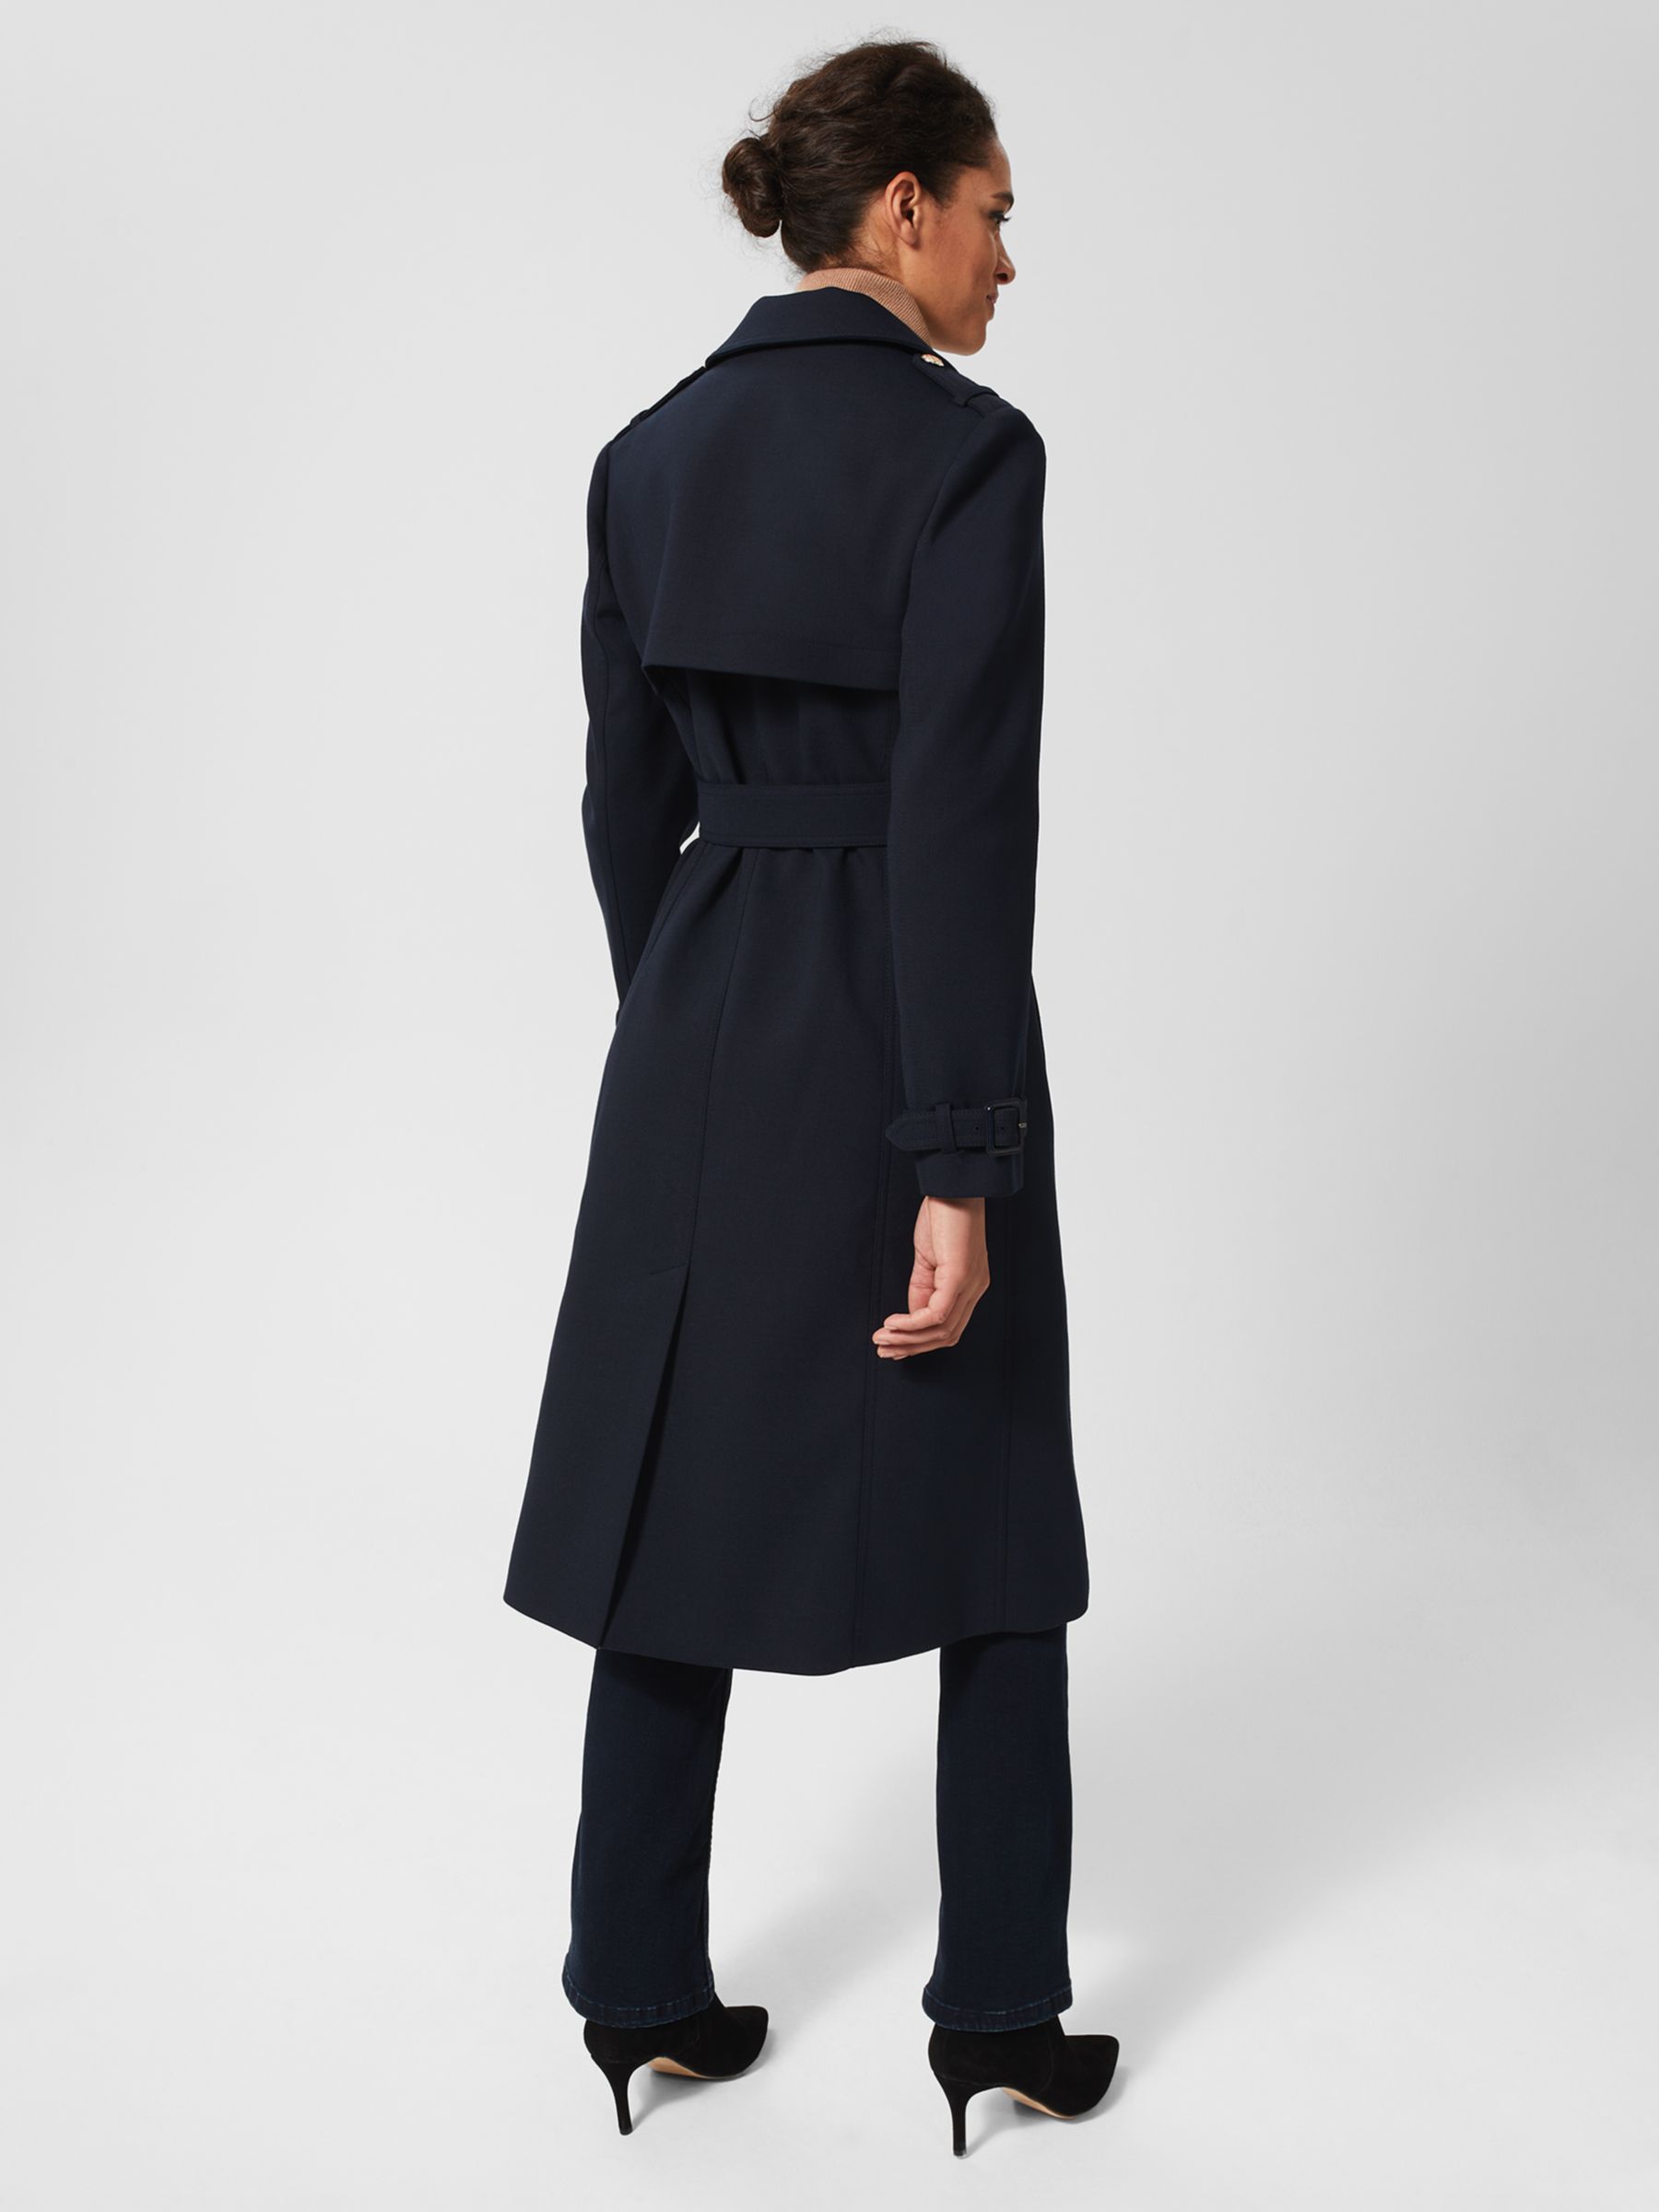 Hobbs Isabelle Wool Blend Trench Coat, Navy at John Lewis & Partners